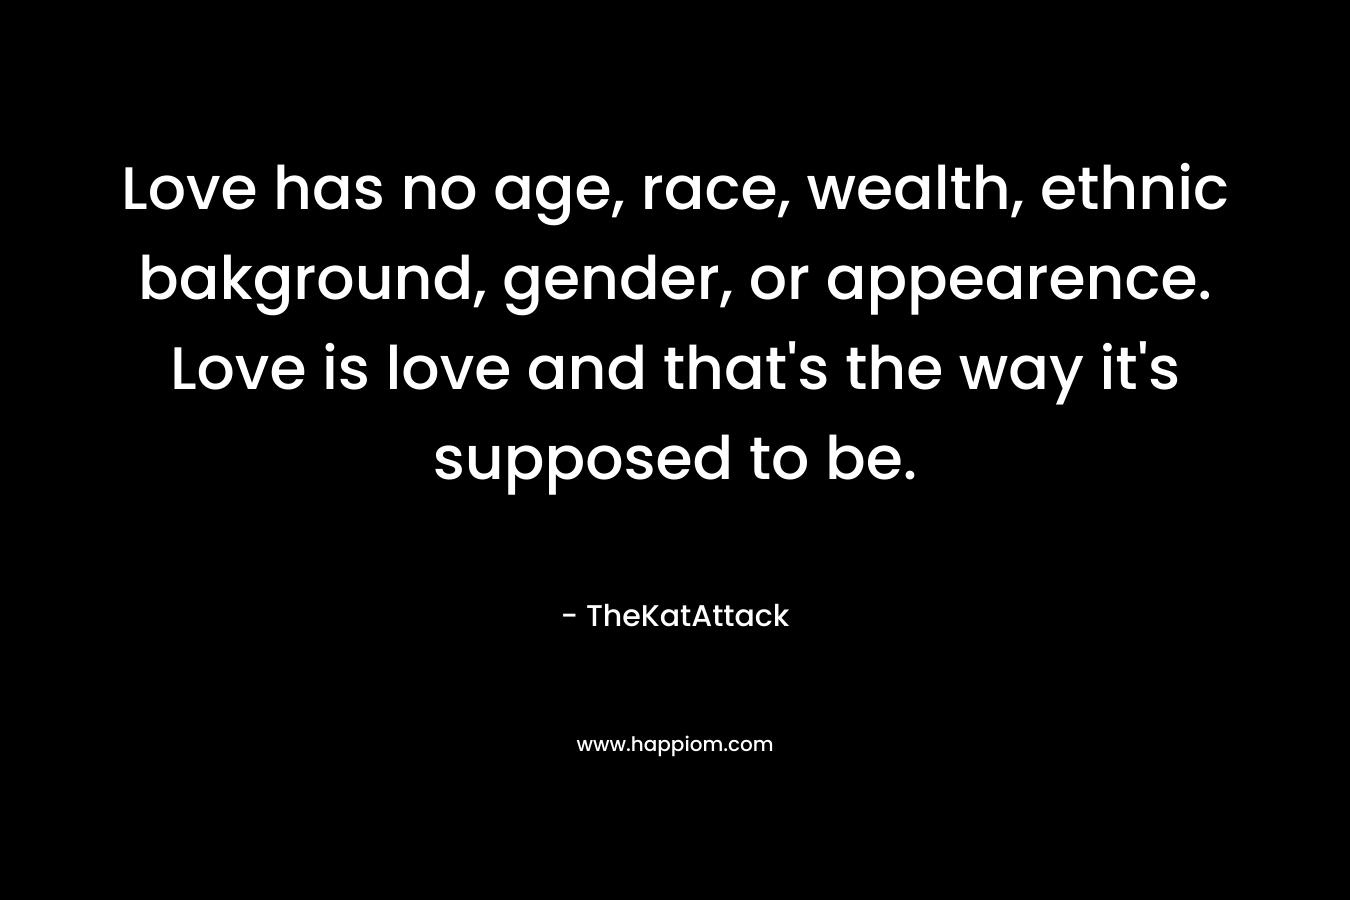 Love has no age, race, wealth, ethnic bakground, gender, or appearence. Love is love and that’s the way it’s supposed to be. – TheKatAttack